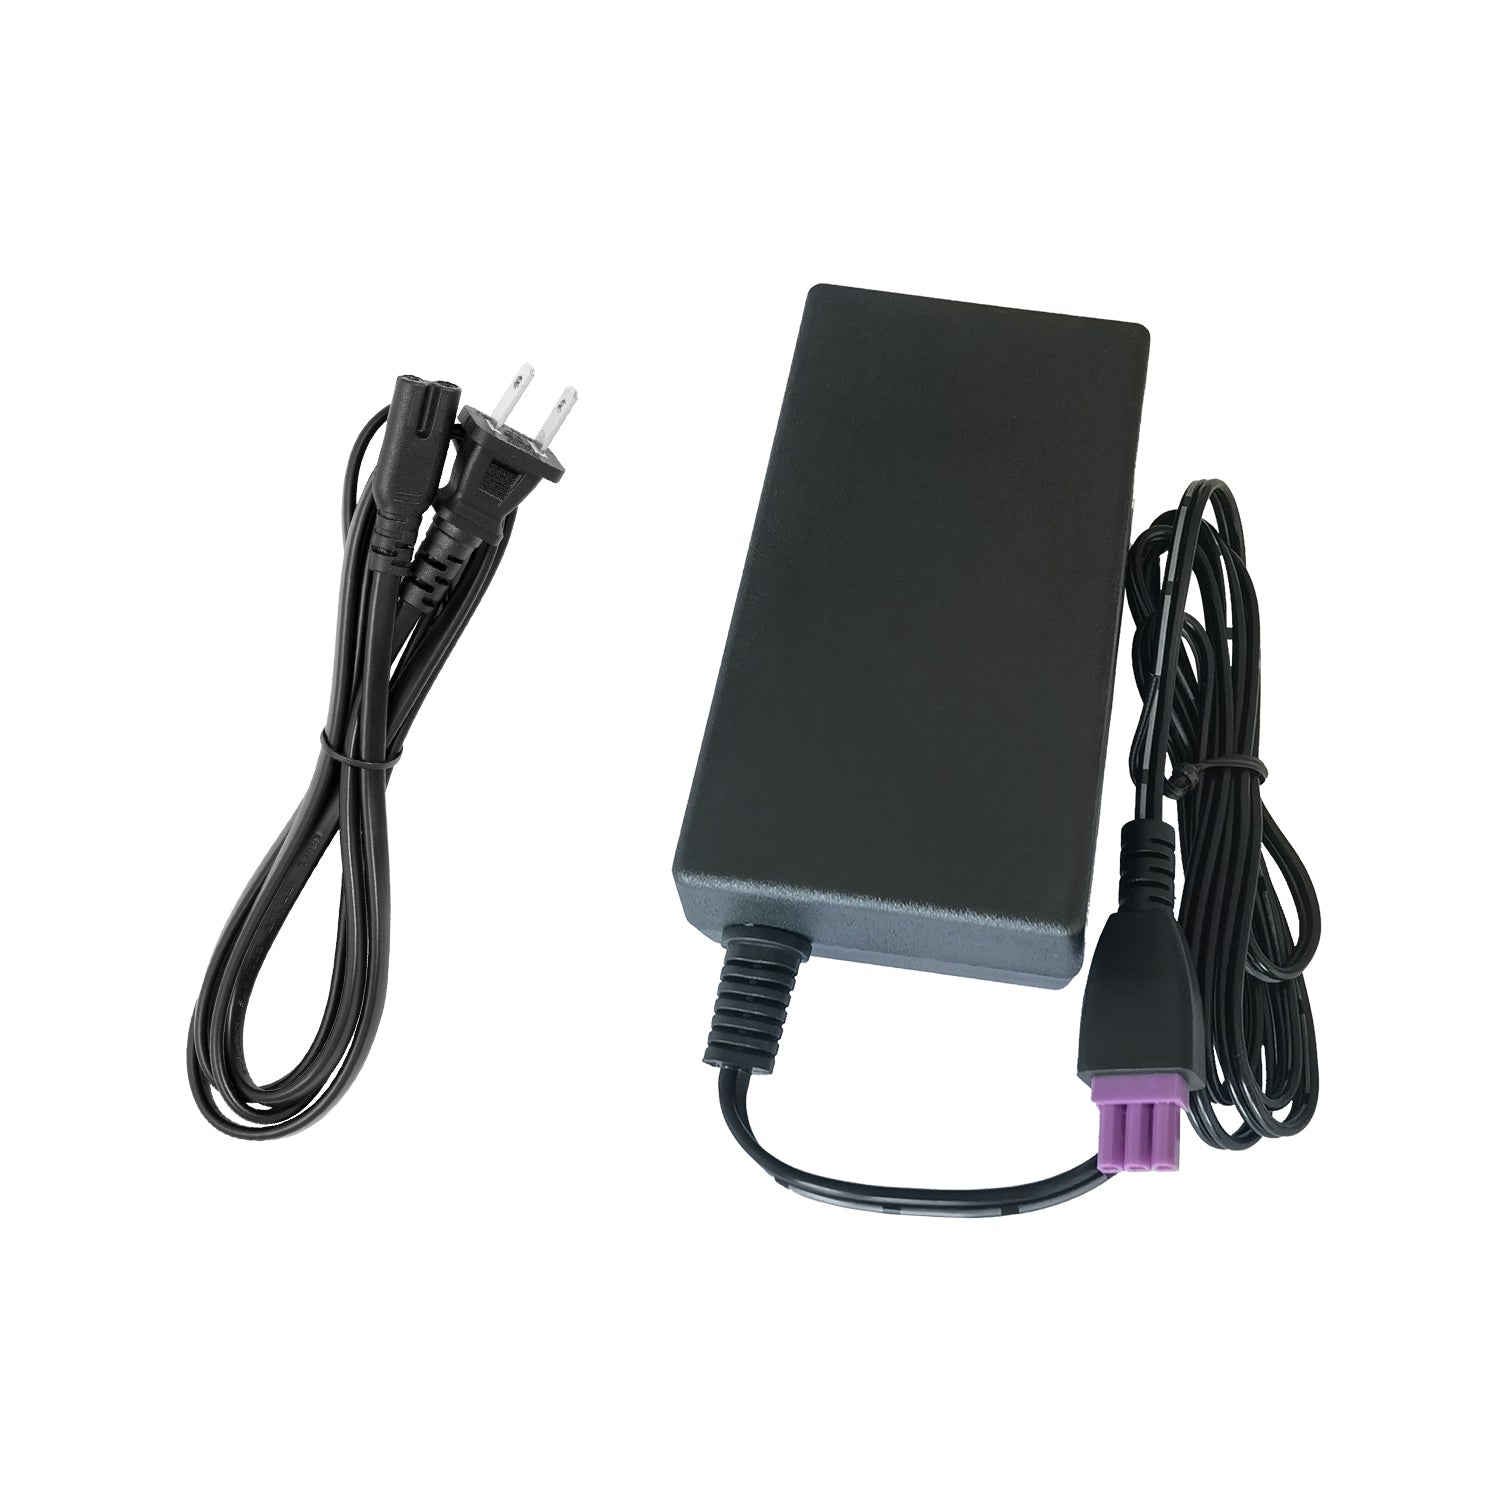 Power Adapter for HP 0957-2280 Printer.